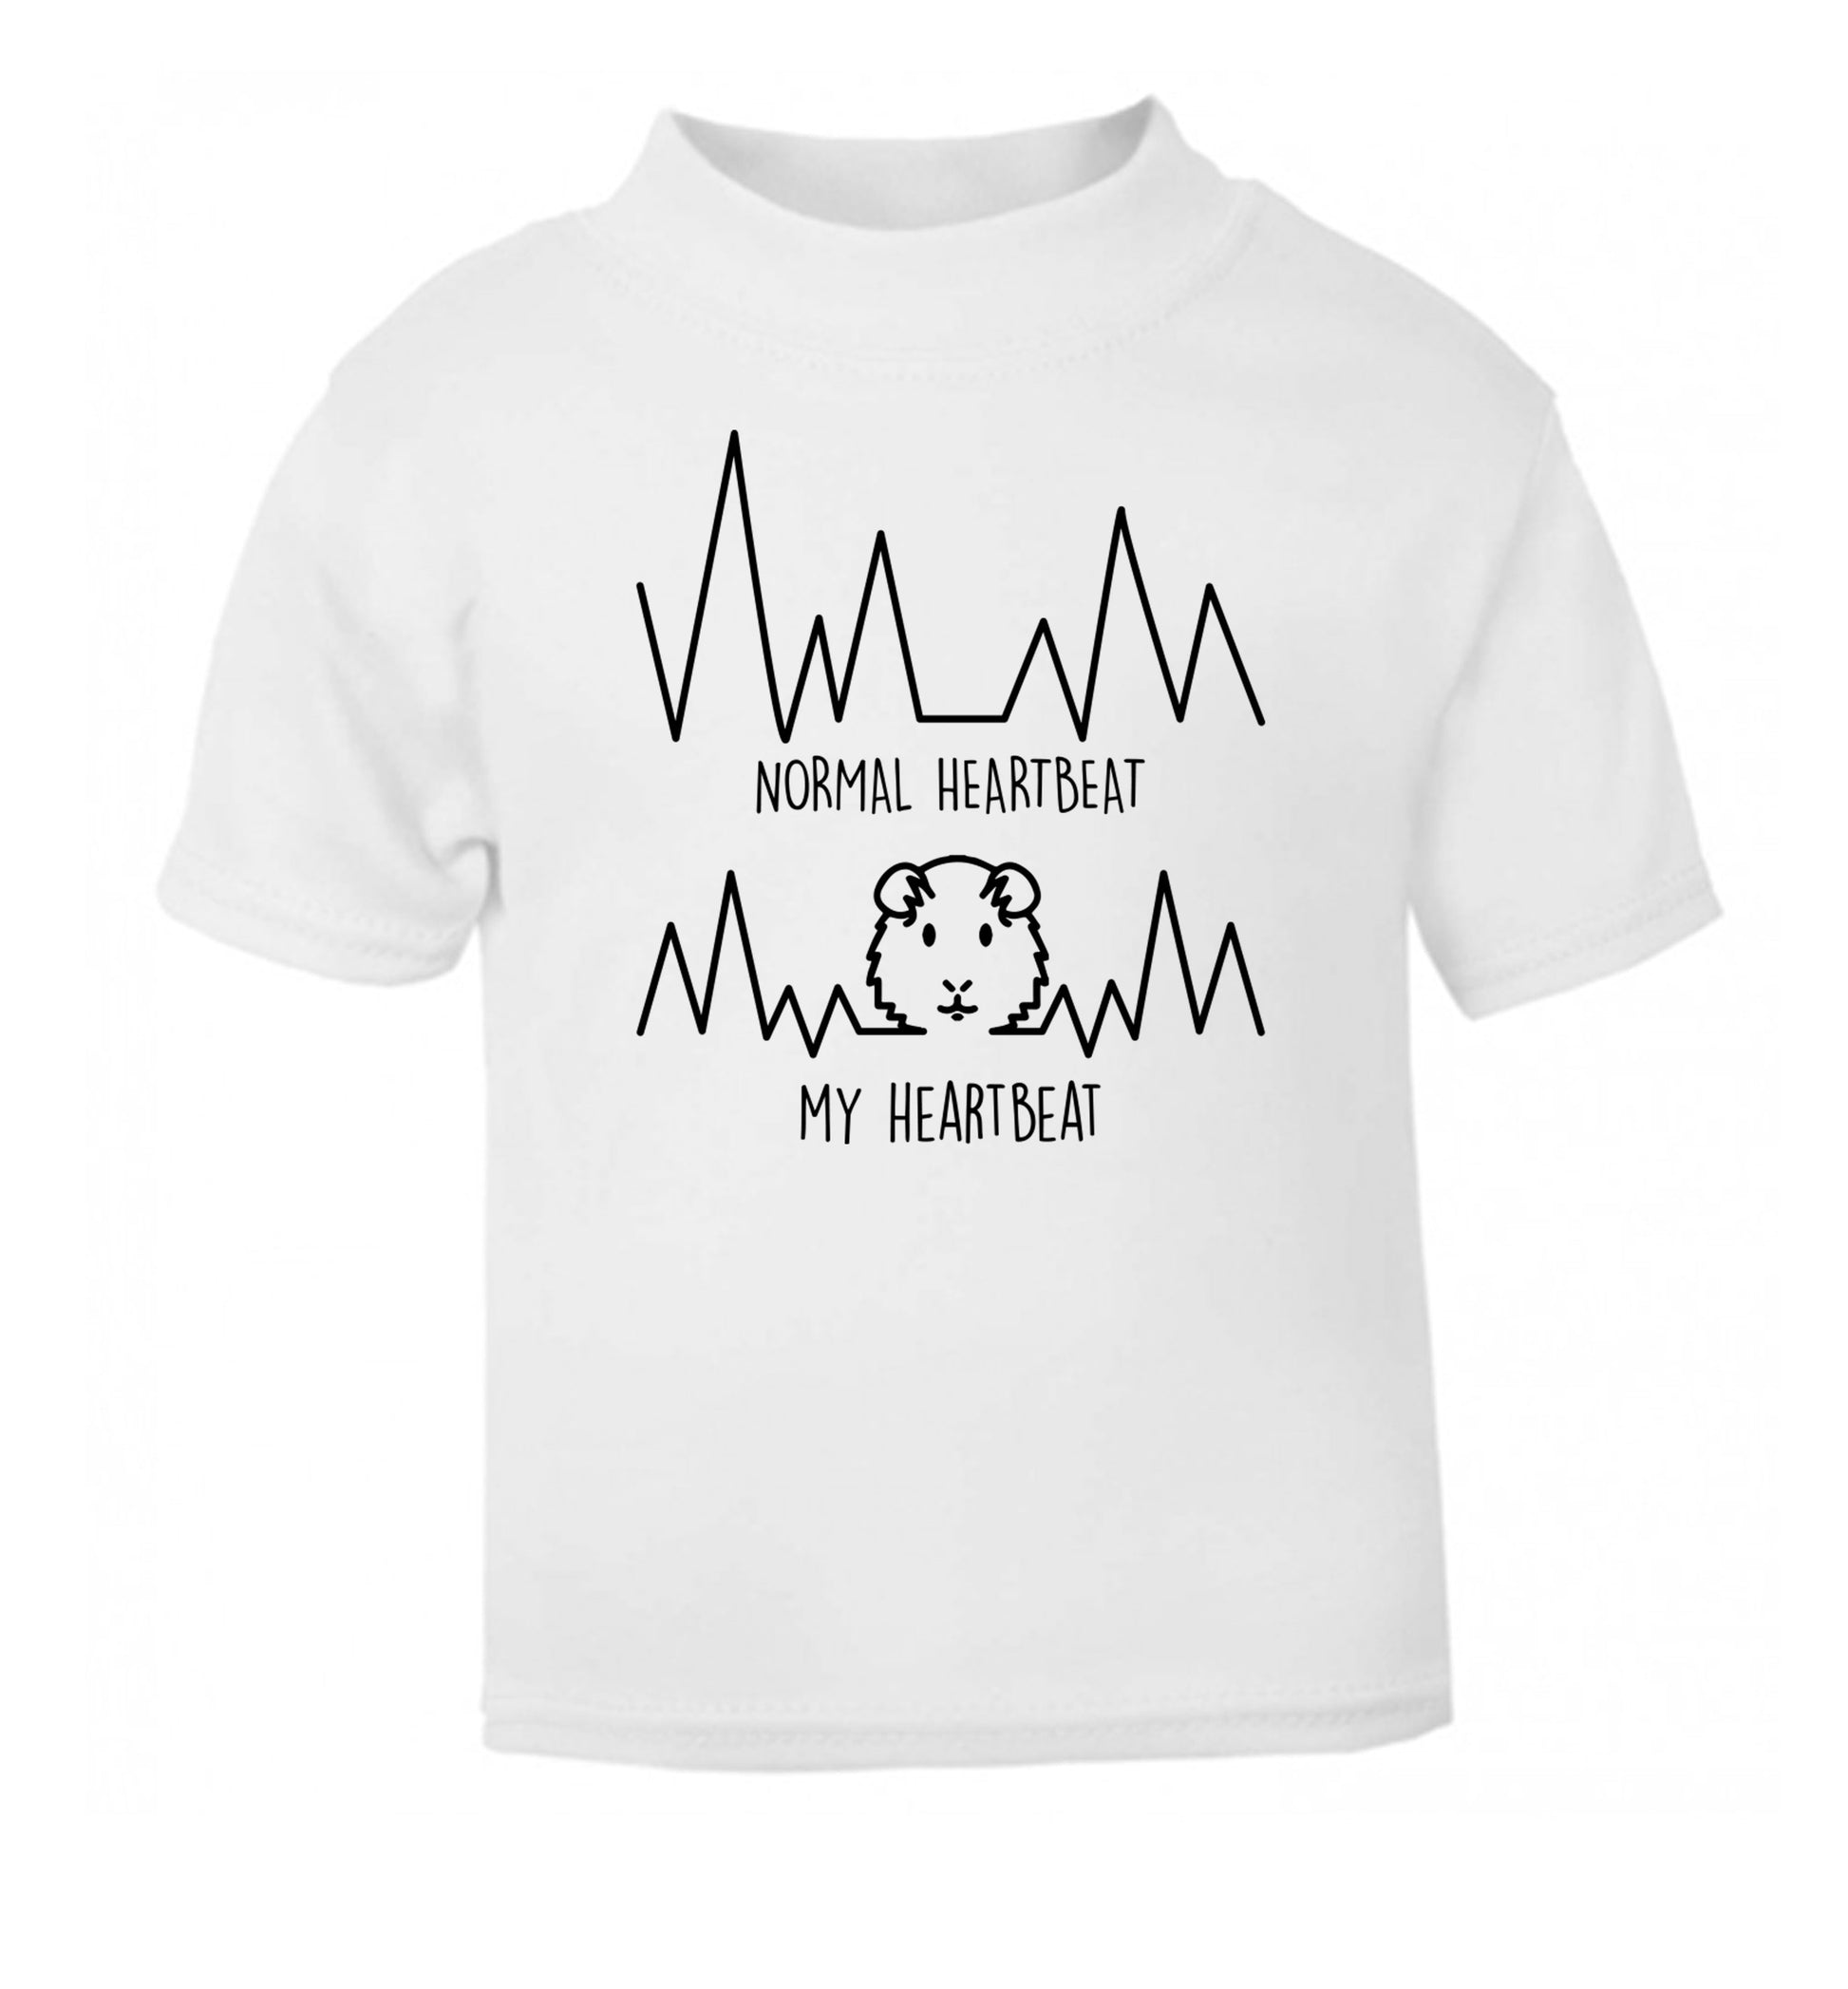 Normal heartbeat vs my heartbeat guinea pig lover white Baby Toddler Tshirt 2 Years